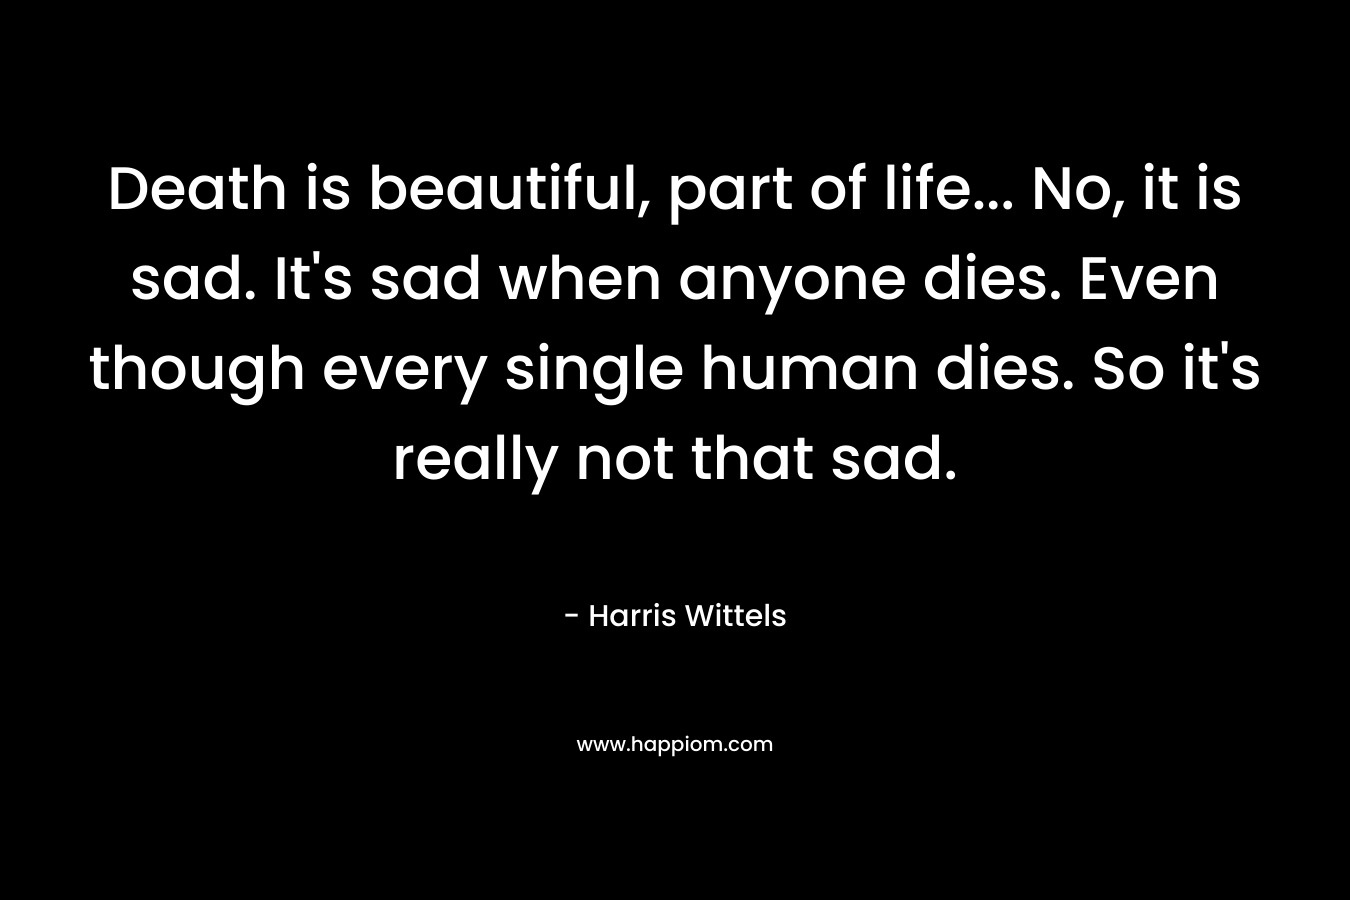 Death is beautiful, part of life... No, it is sad. It's sad when anyone dies. Even though every single human dies. So it's really not that sad.